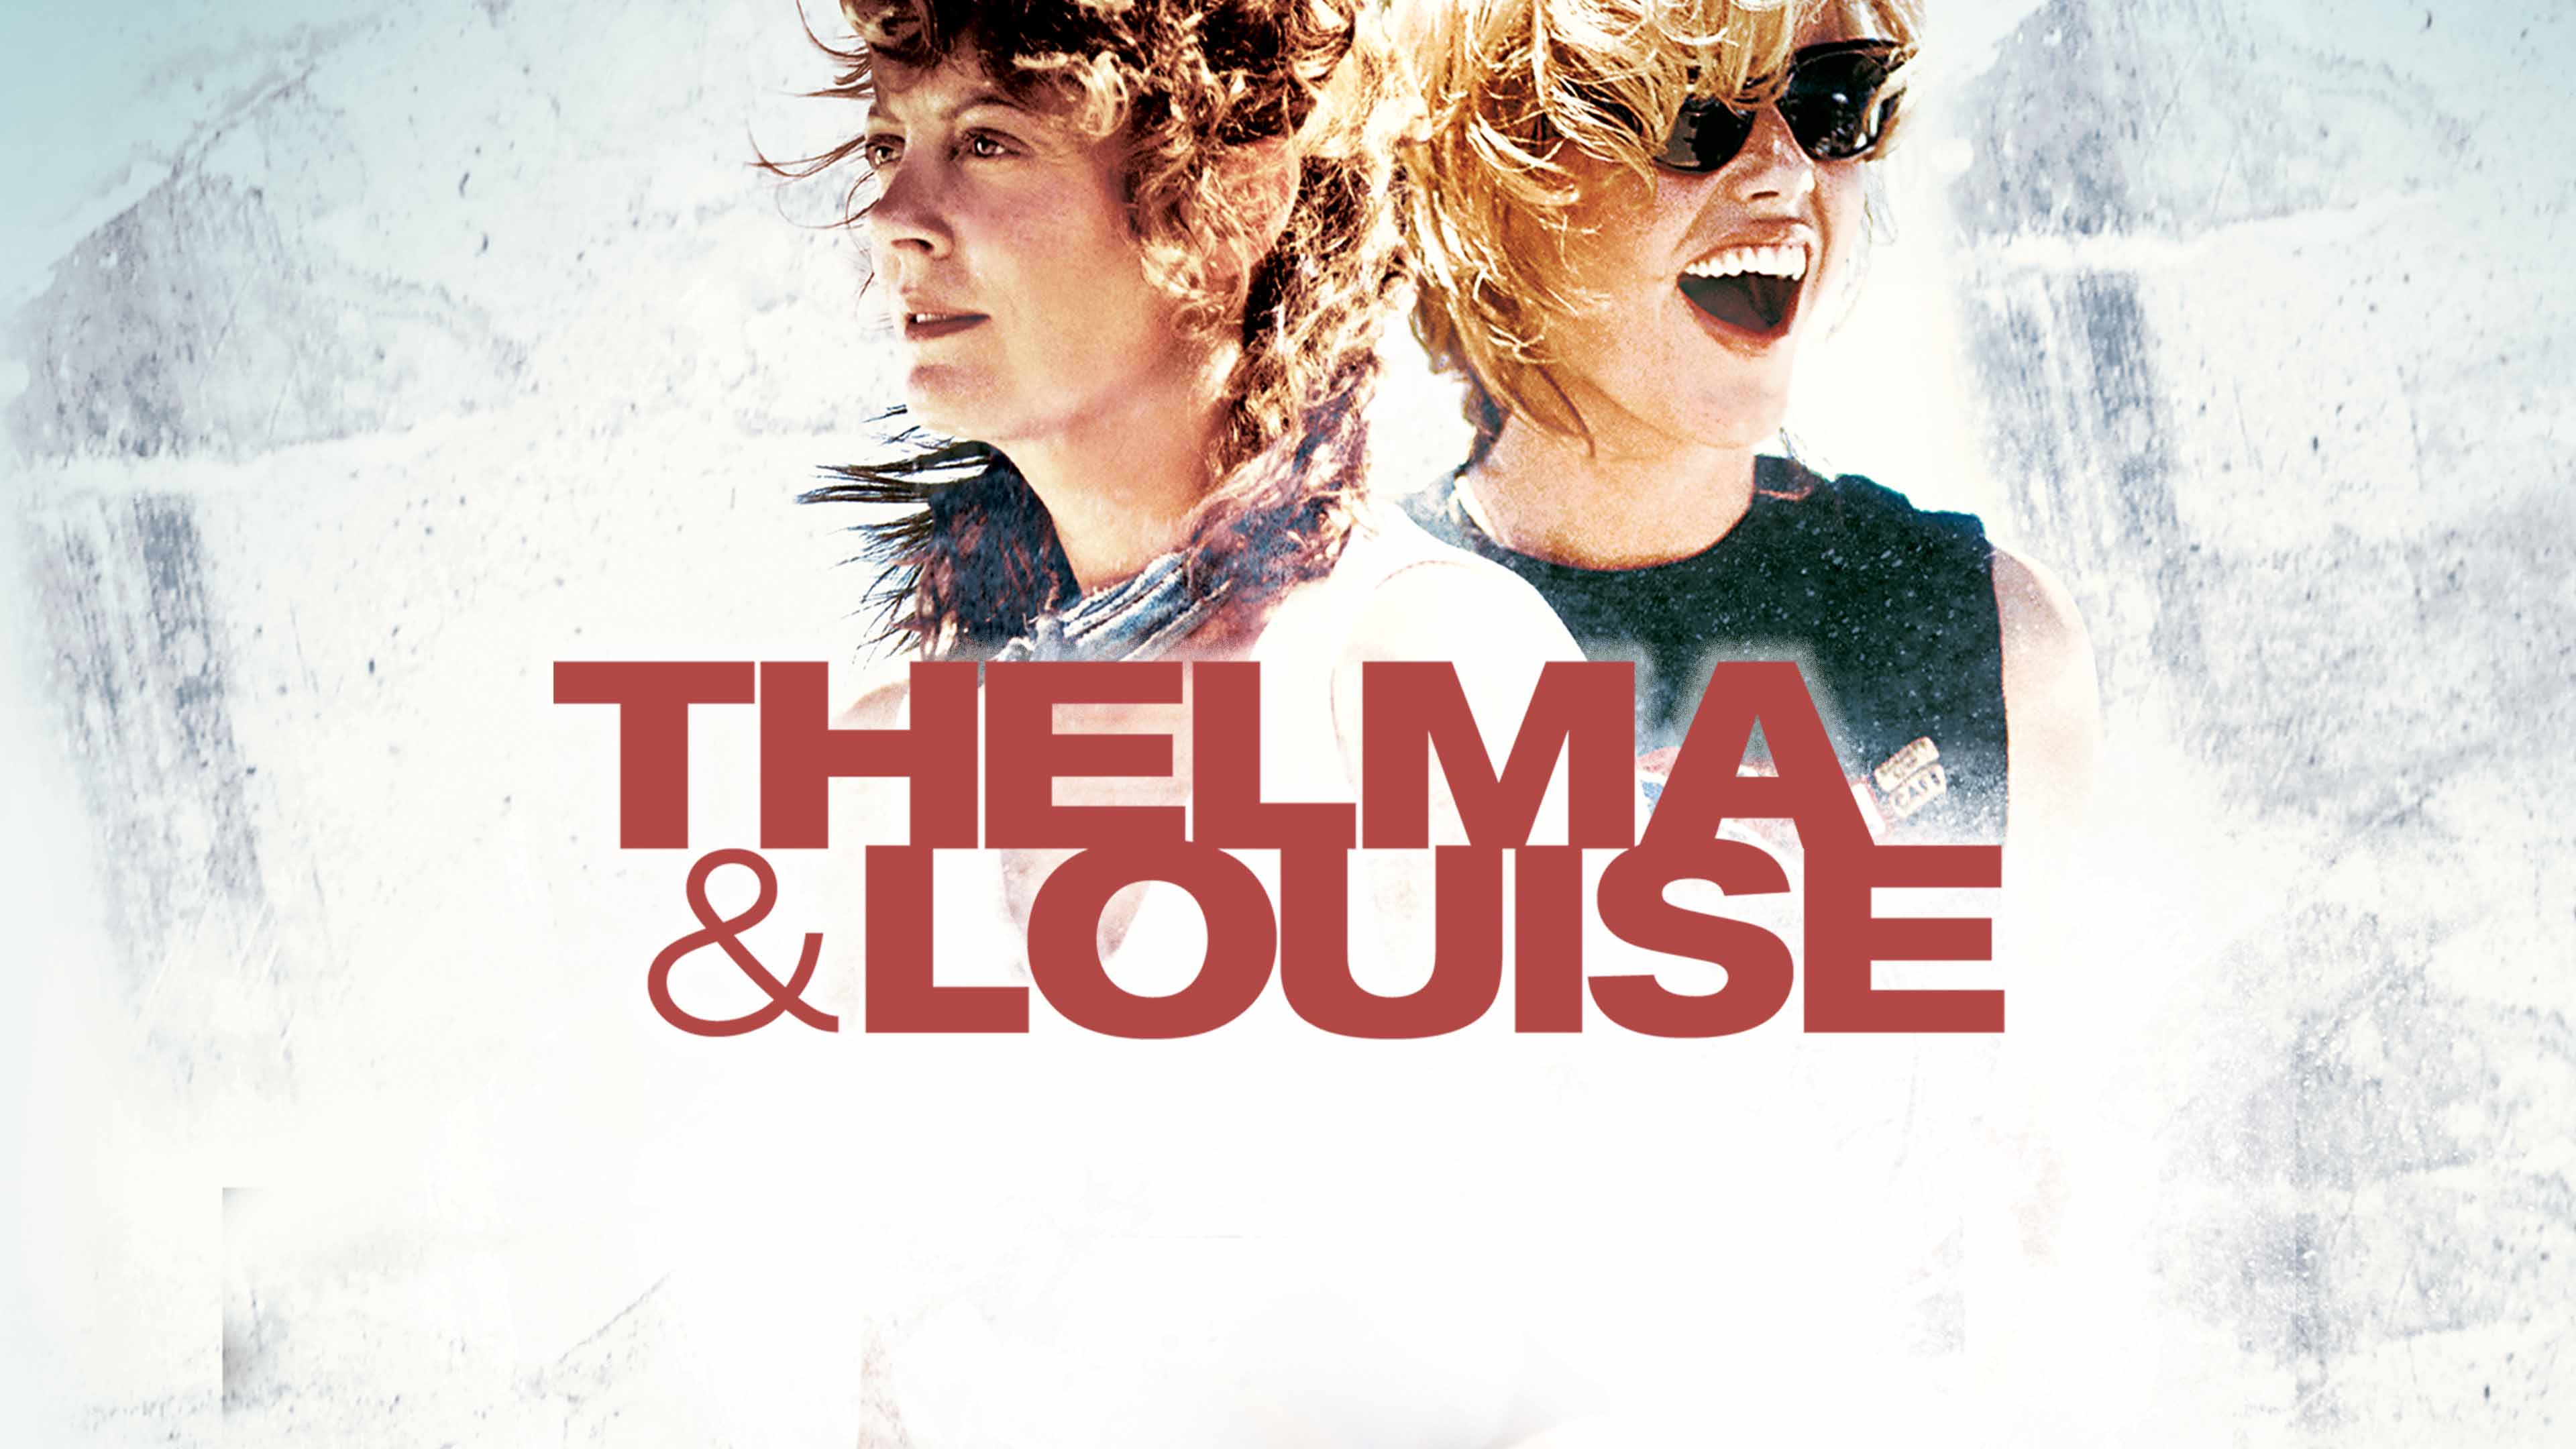 Watch Thelma & Louise Online | Stream Full Movies